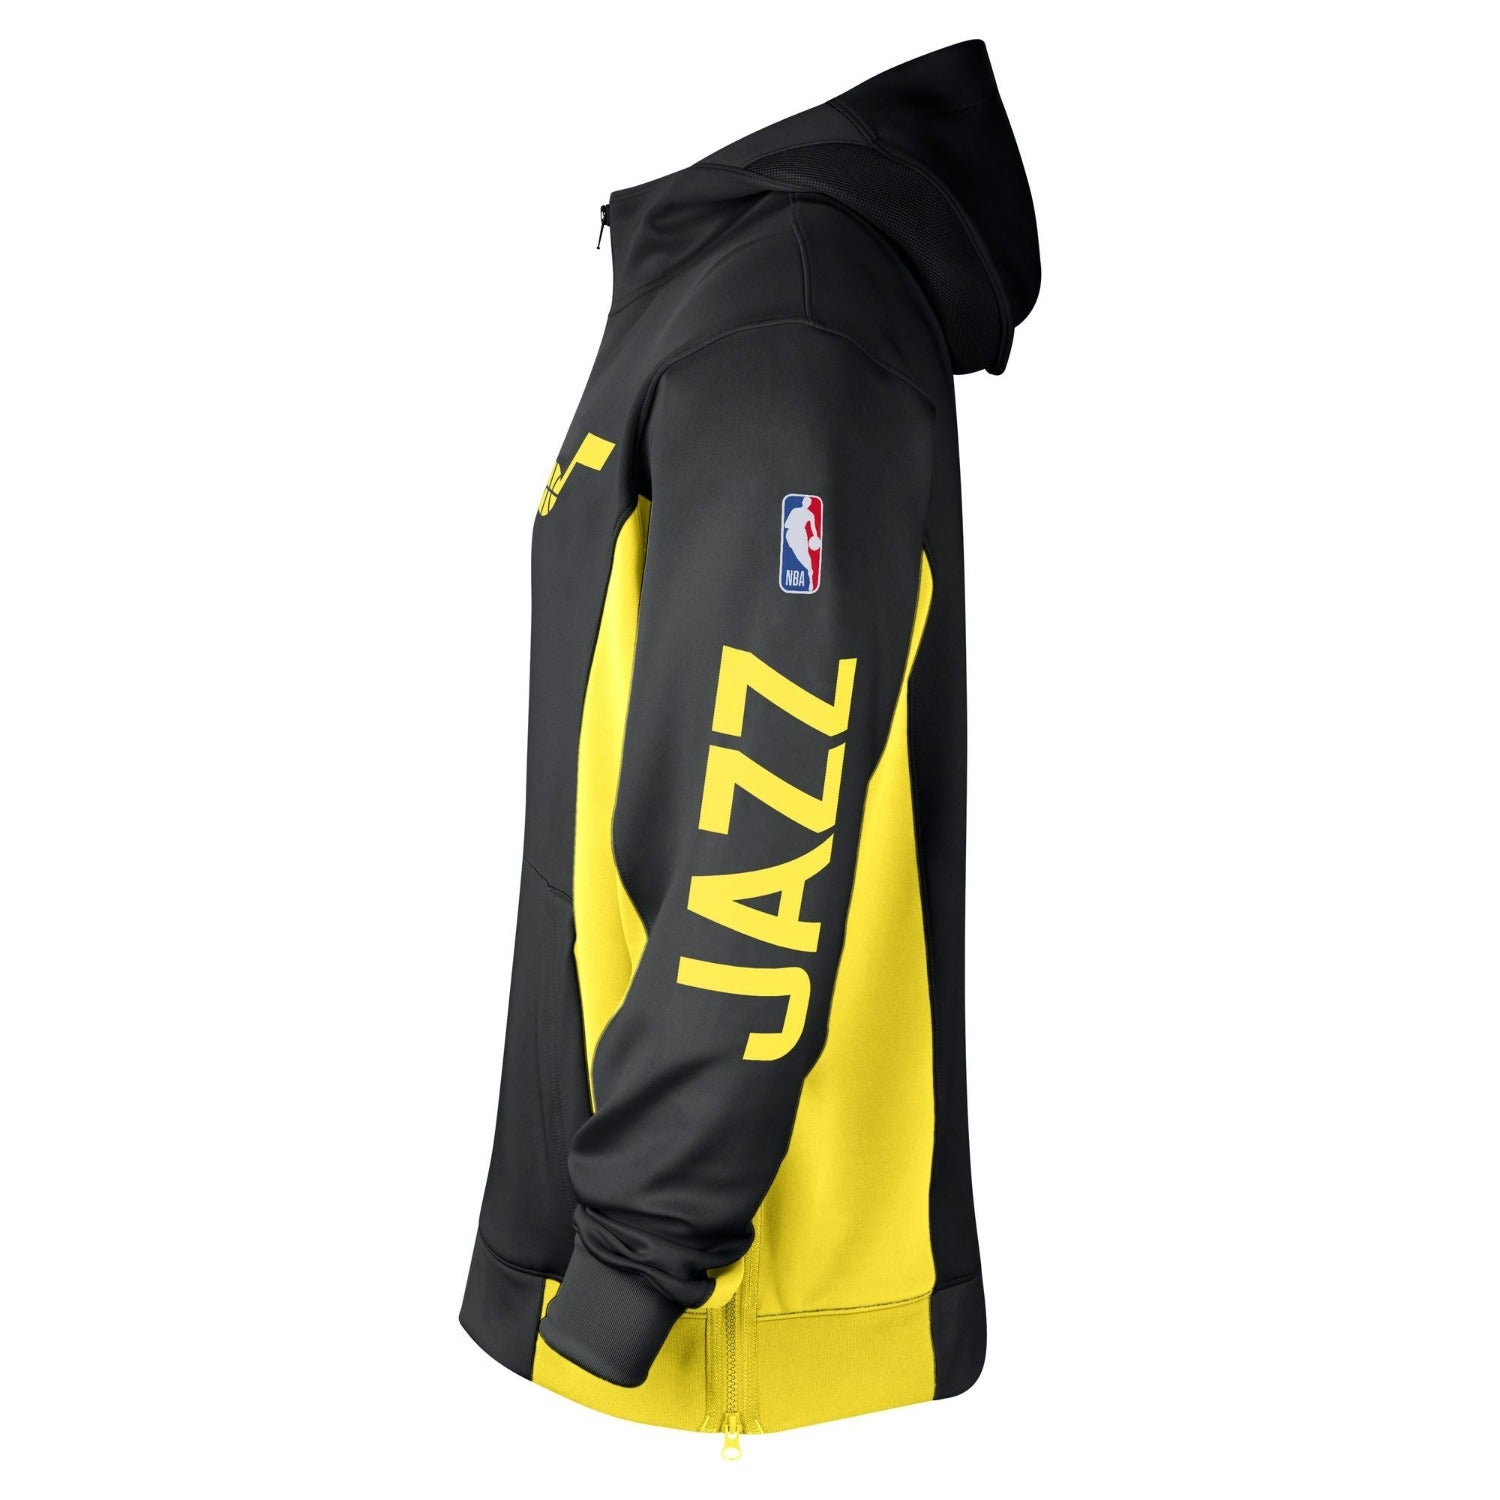 Discounted Women's Utah Jazz Gear, Cheap Womens Jazz Apparel, Clearance  Ladies Jazz Outfits